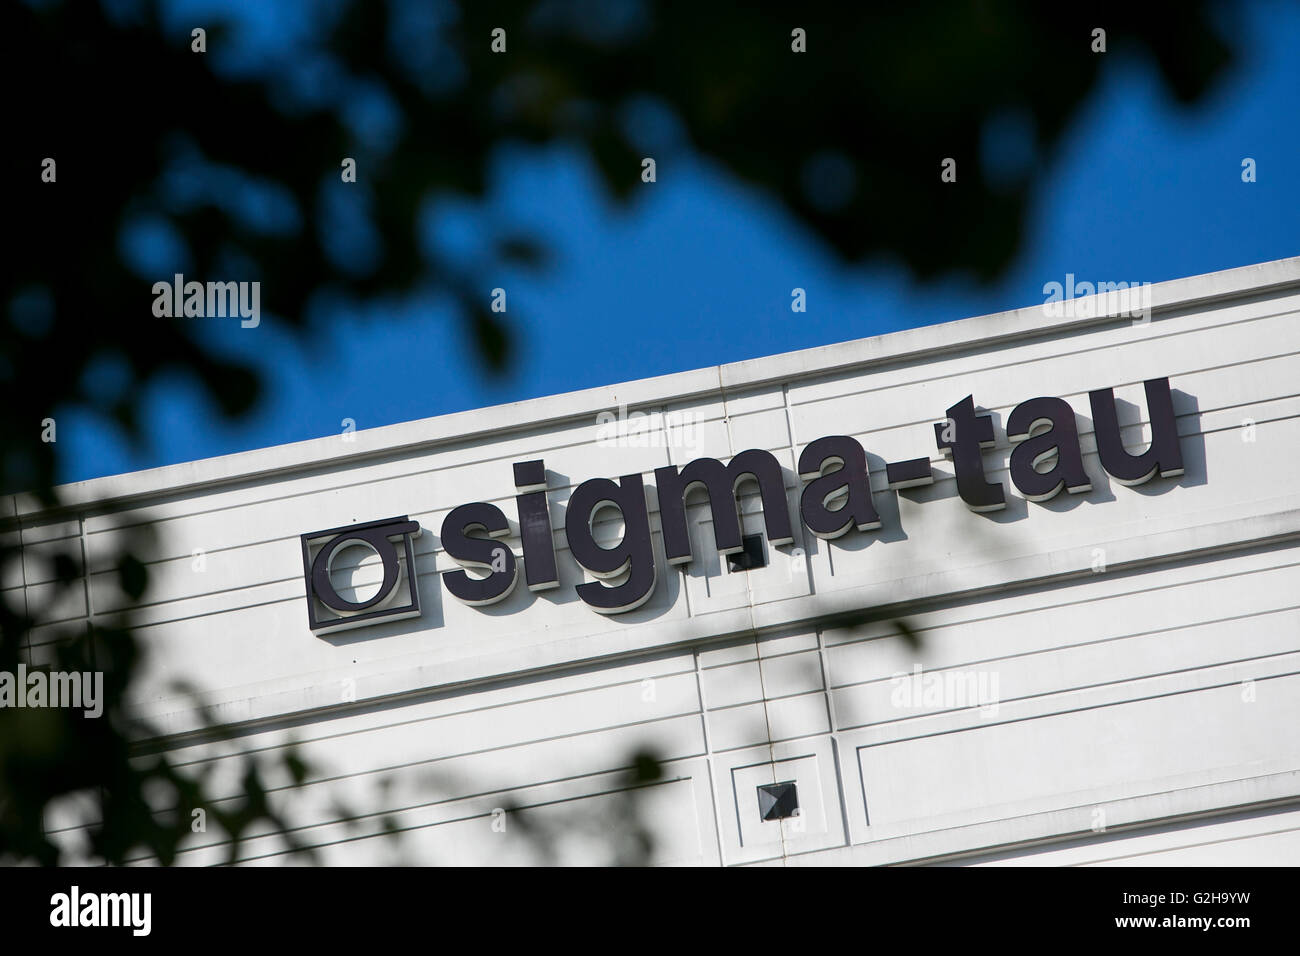 A logo sign outside of a facility occupied by Sigma-Tau Pharmaceuticals, Inc., in Gaithersburg, Maryland on May 29, 2016. Stock Photo